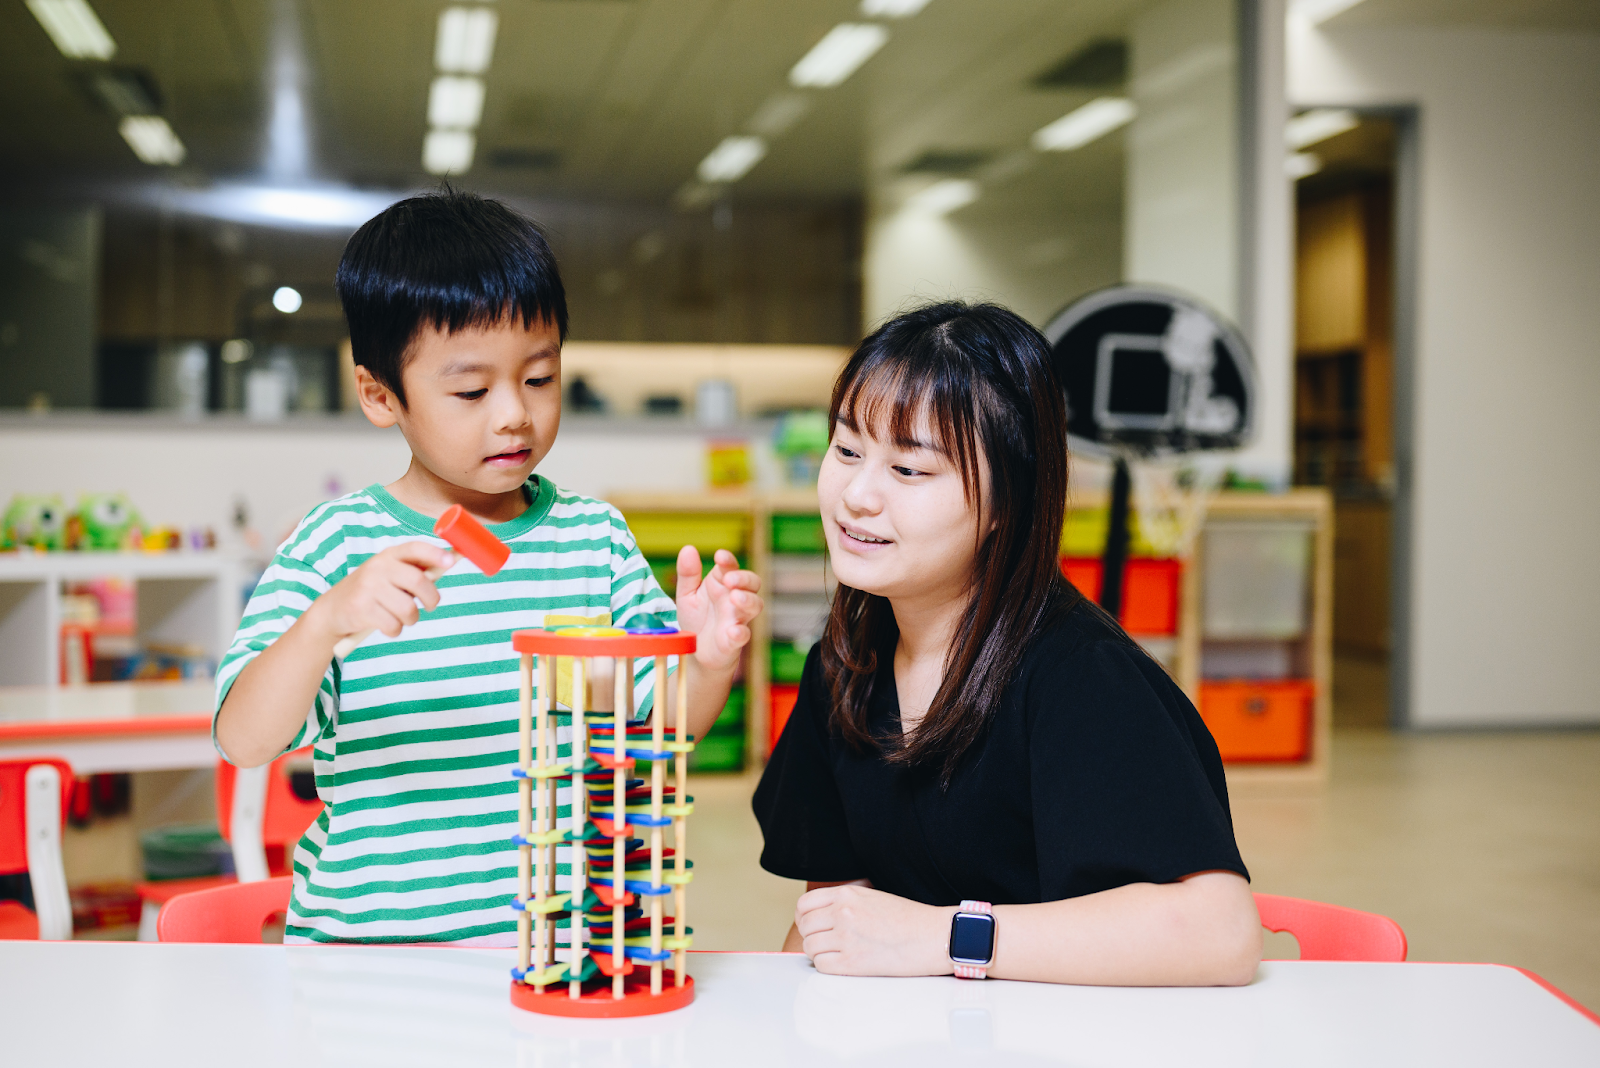 Effective Treatment for Autism in Hong Kong